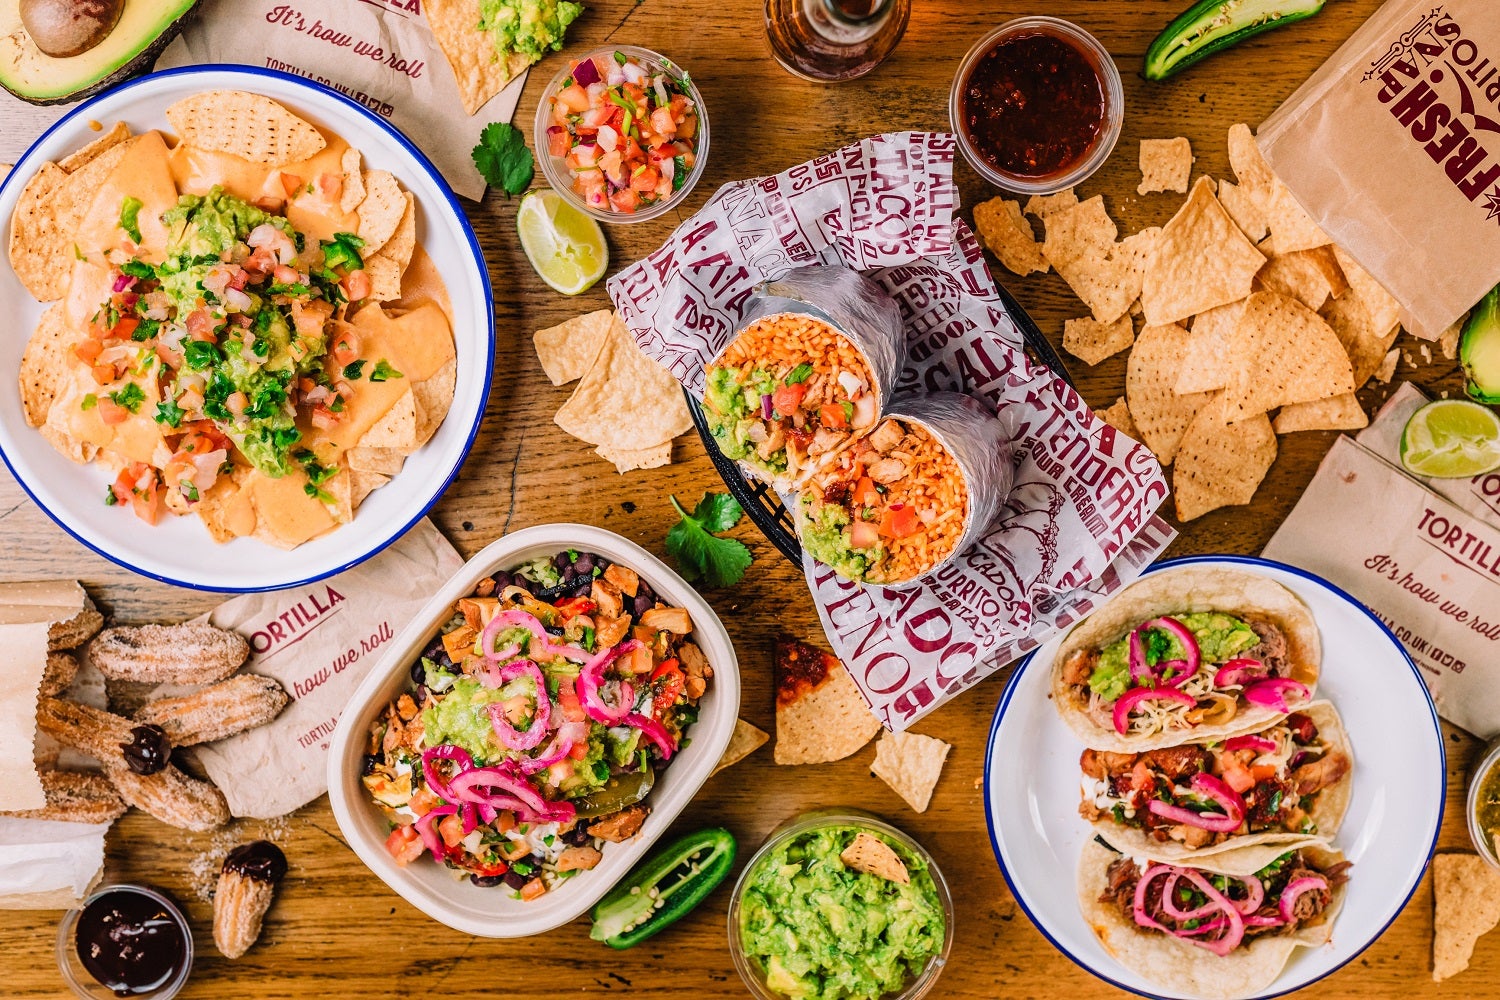 Tortilla: How they became the UK’s highest-rated fast-casual Mexican food chain with Reputation